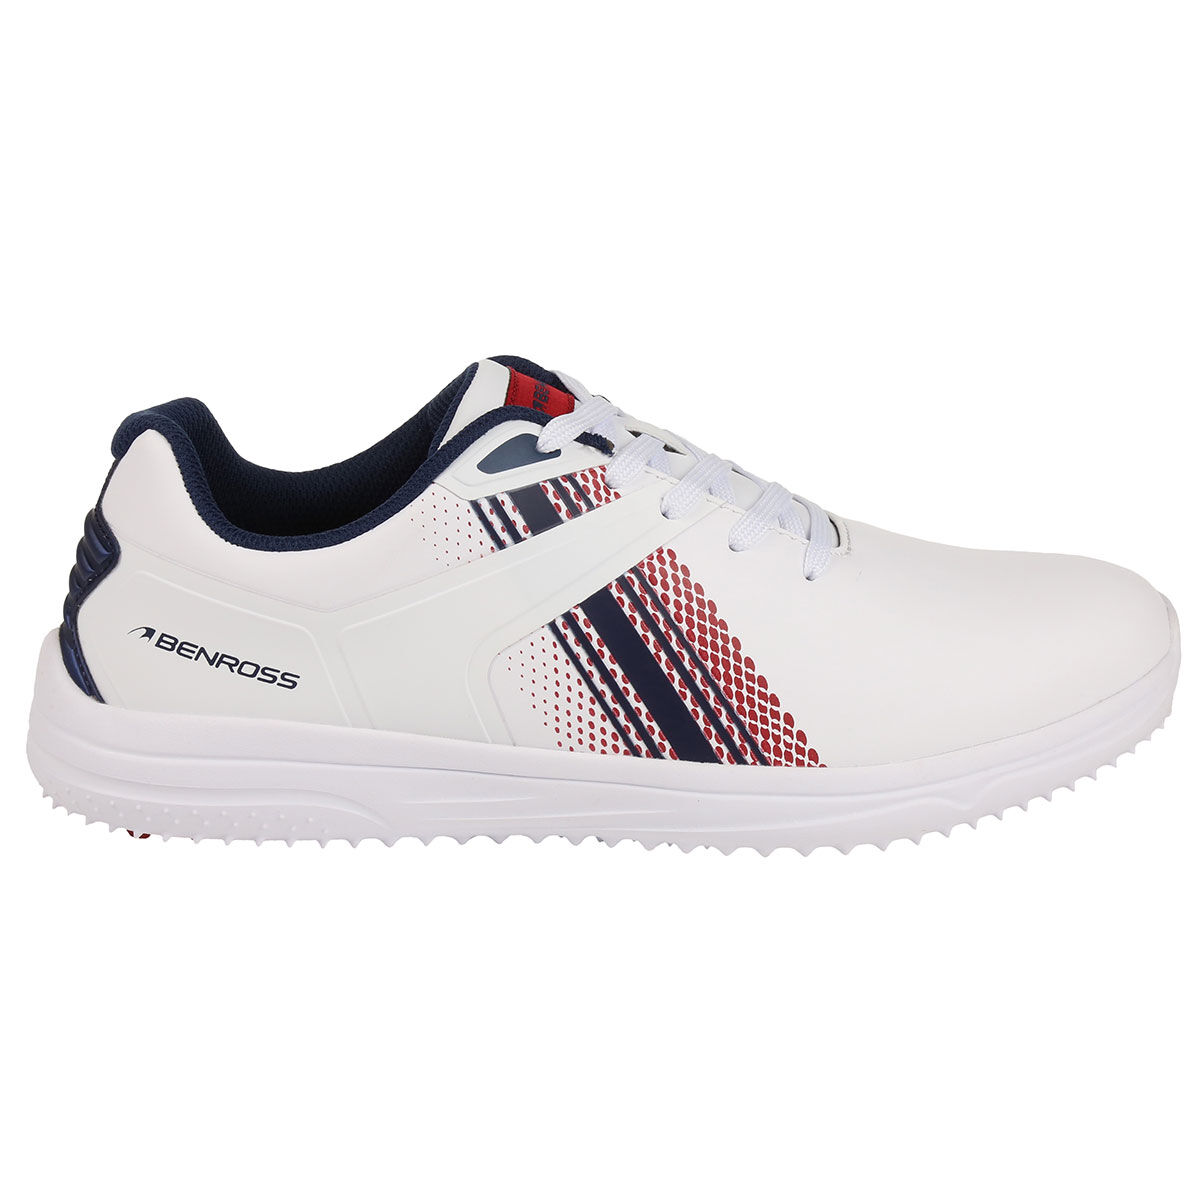 Benross White, Navy Blue and Red Stylish Dynamo Waterproof Spikeless Golf Shoes, Size: 10 | American Golf